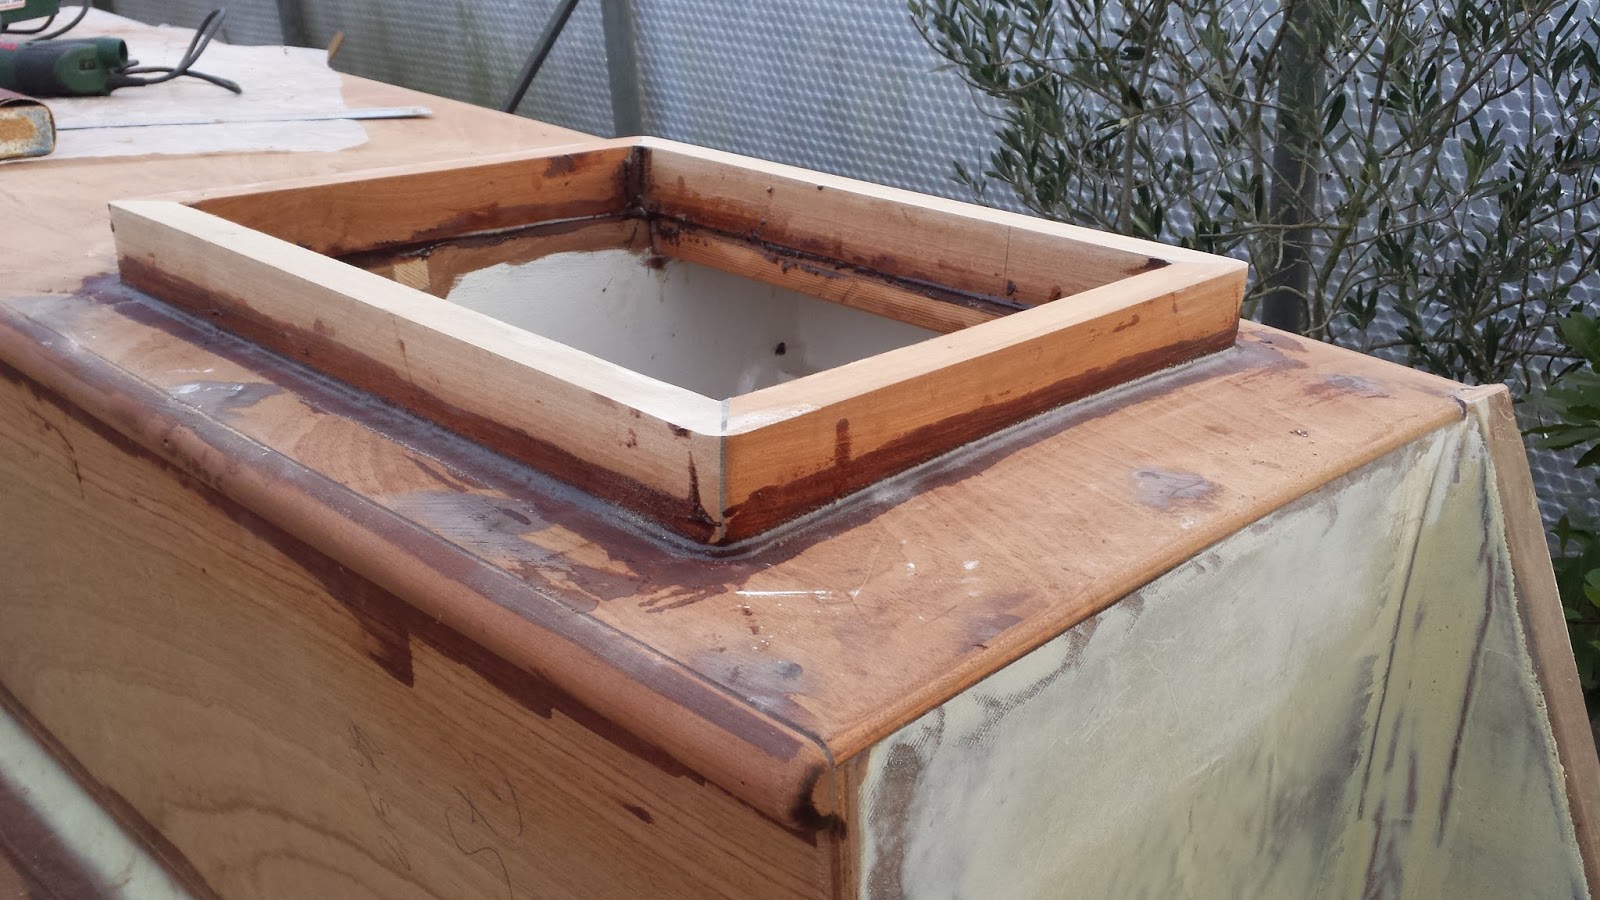 Wooden Boat Building Blog: Stowage Hatch Coaming